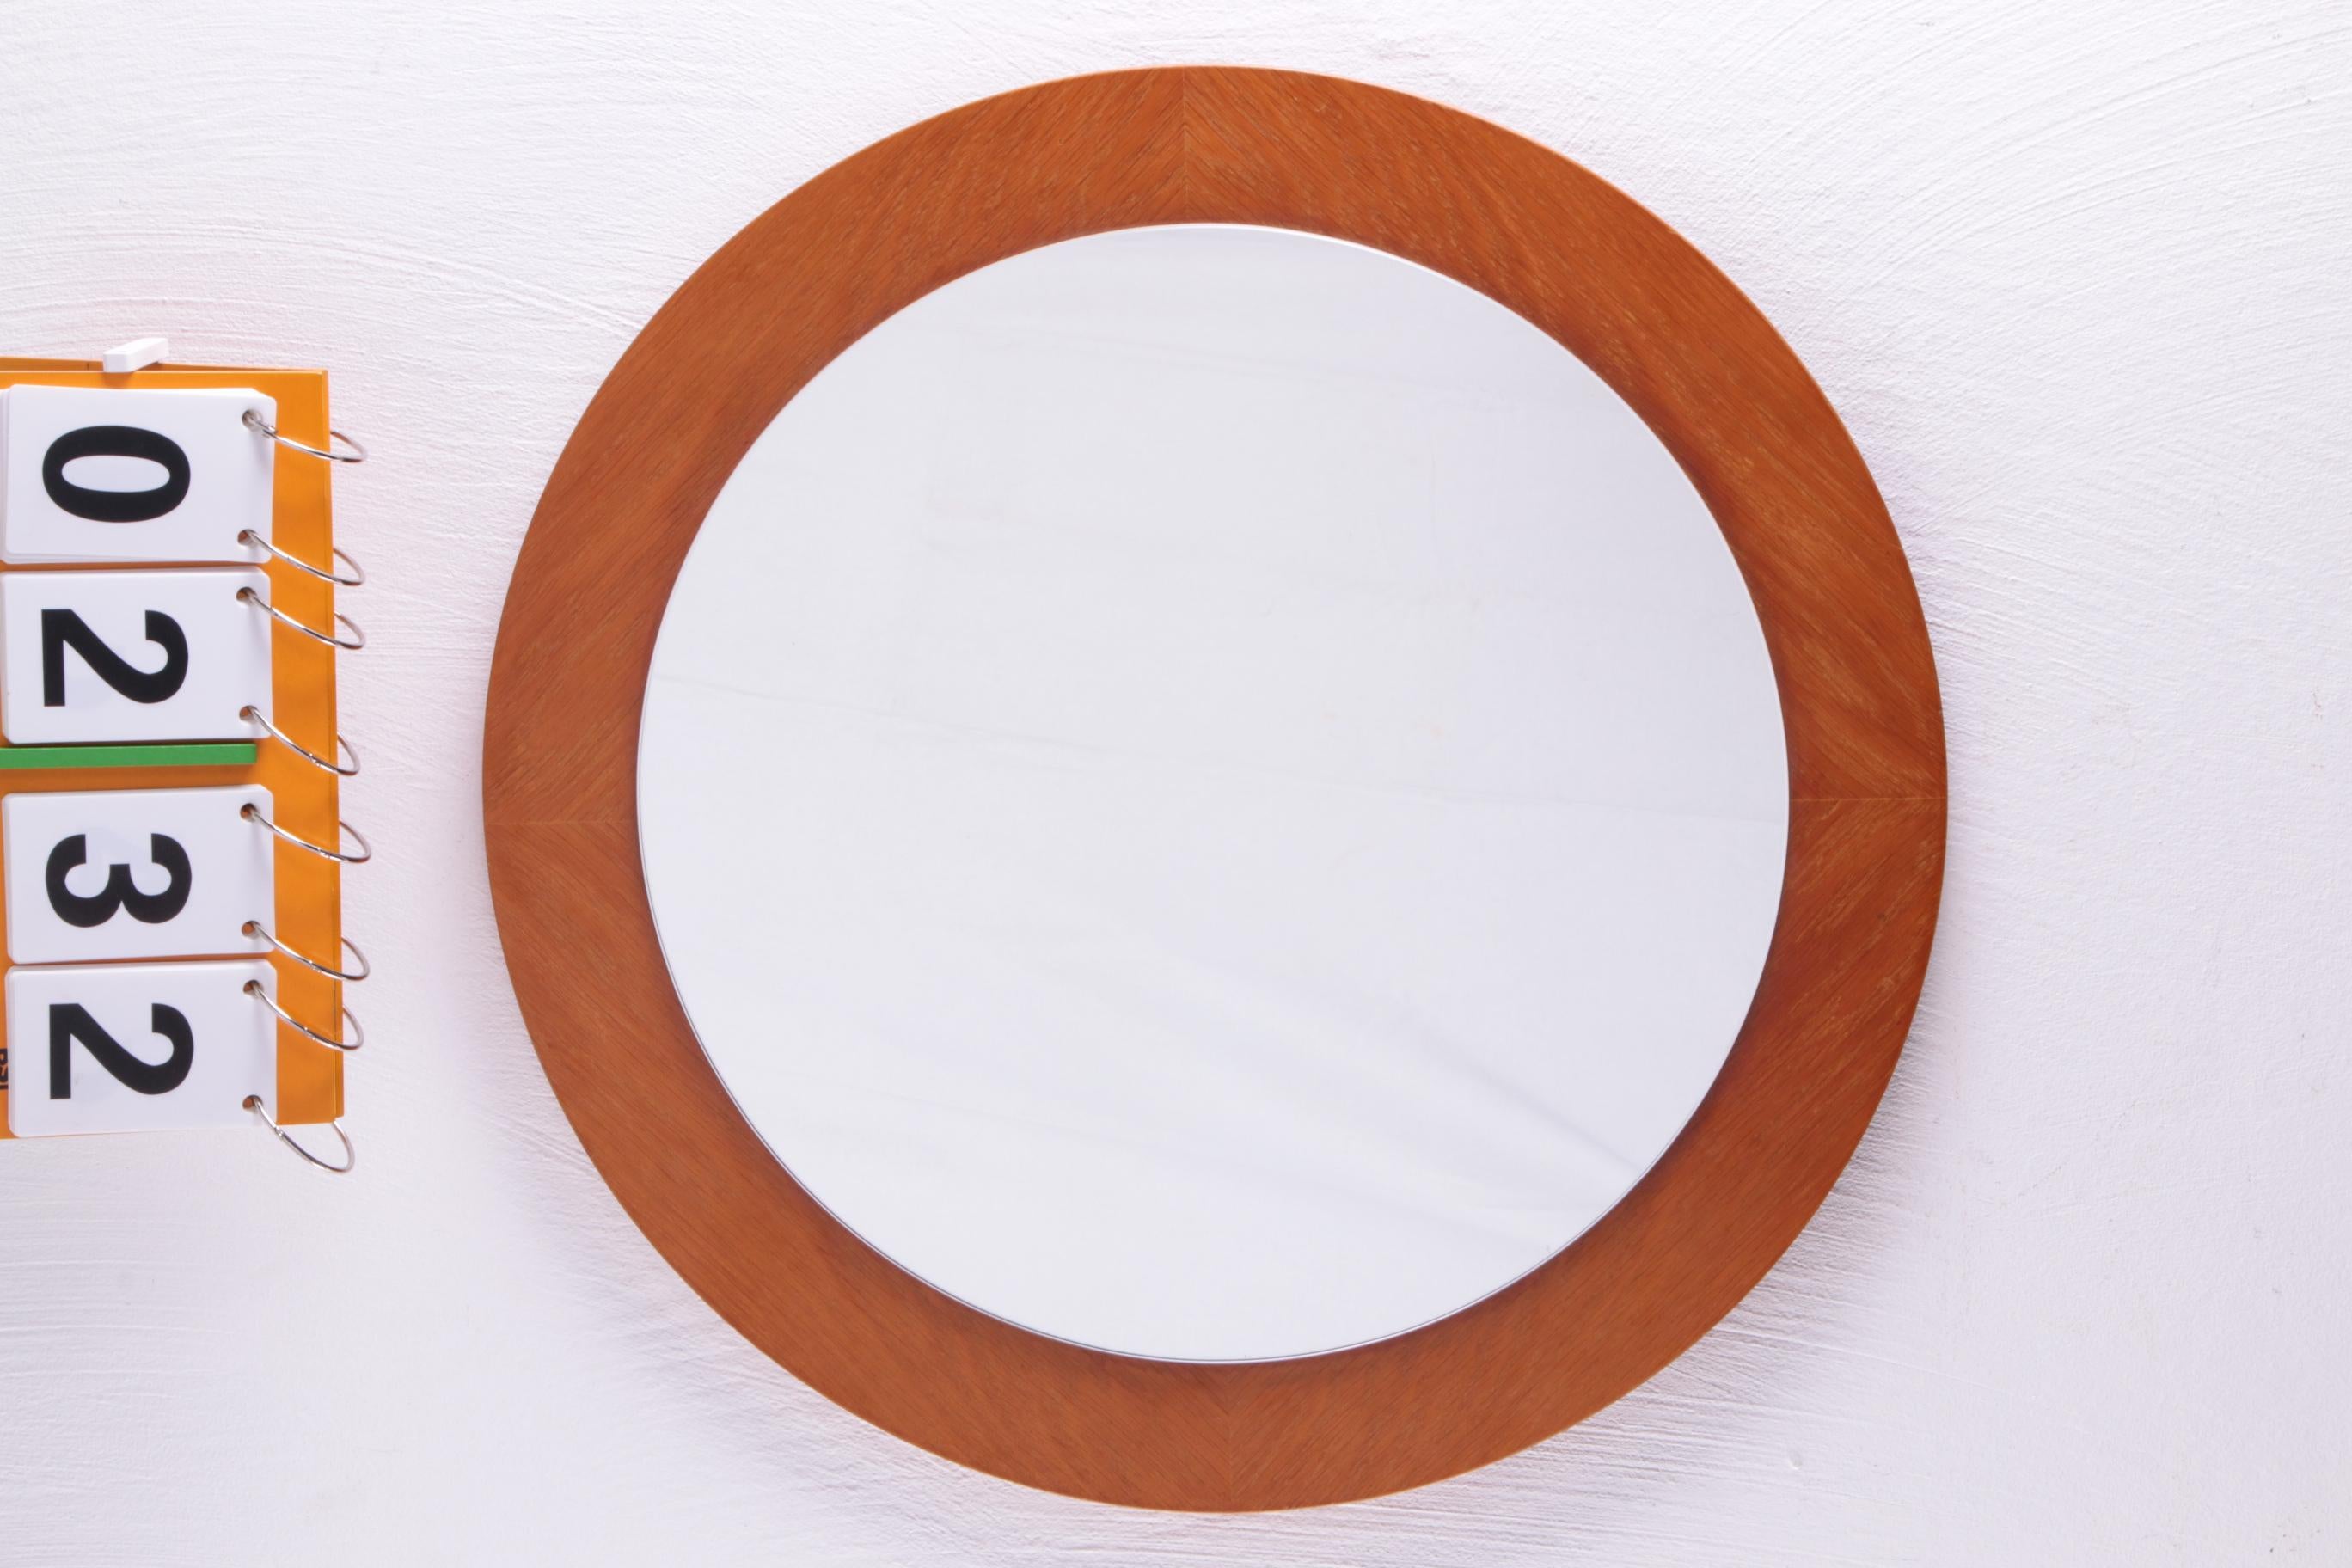 A beautiful large round mirror made in Denmark around the 60s. Whether you put it up in the bathroom or bedroom, this mirror will add a subtle warm touch to your interior.

The mirror is mounted on a round light wooden surface. This gives the mirror